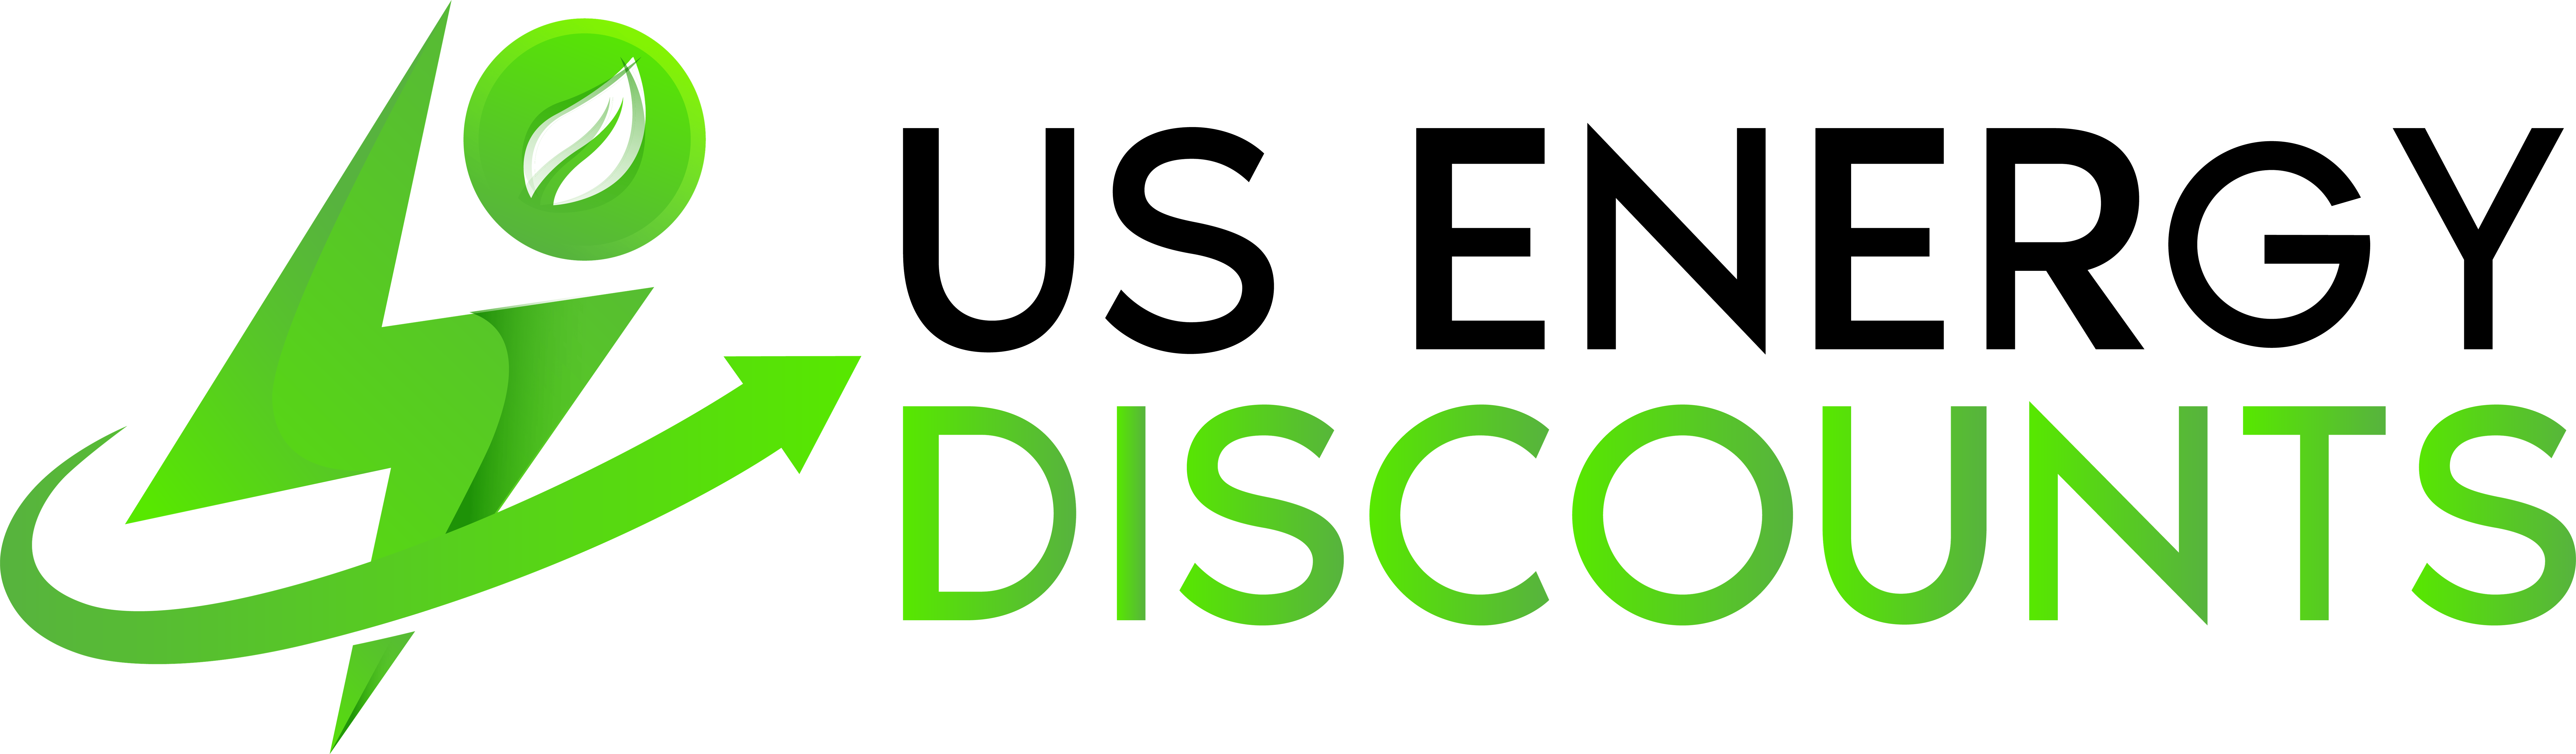 commercial-energy-supplier-us-energy-discounts-cheap-energy